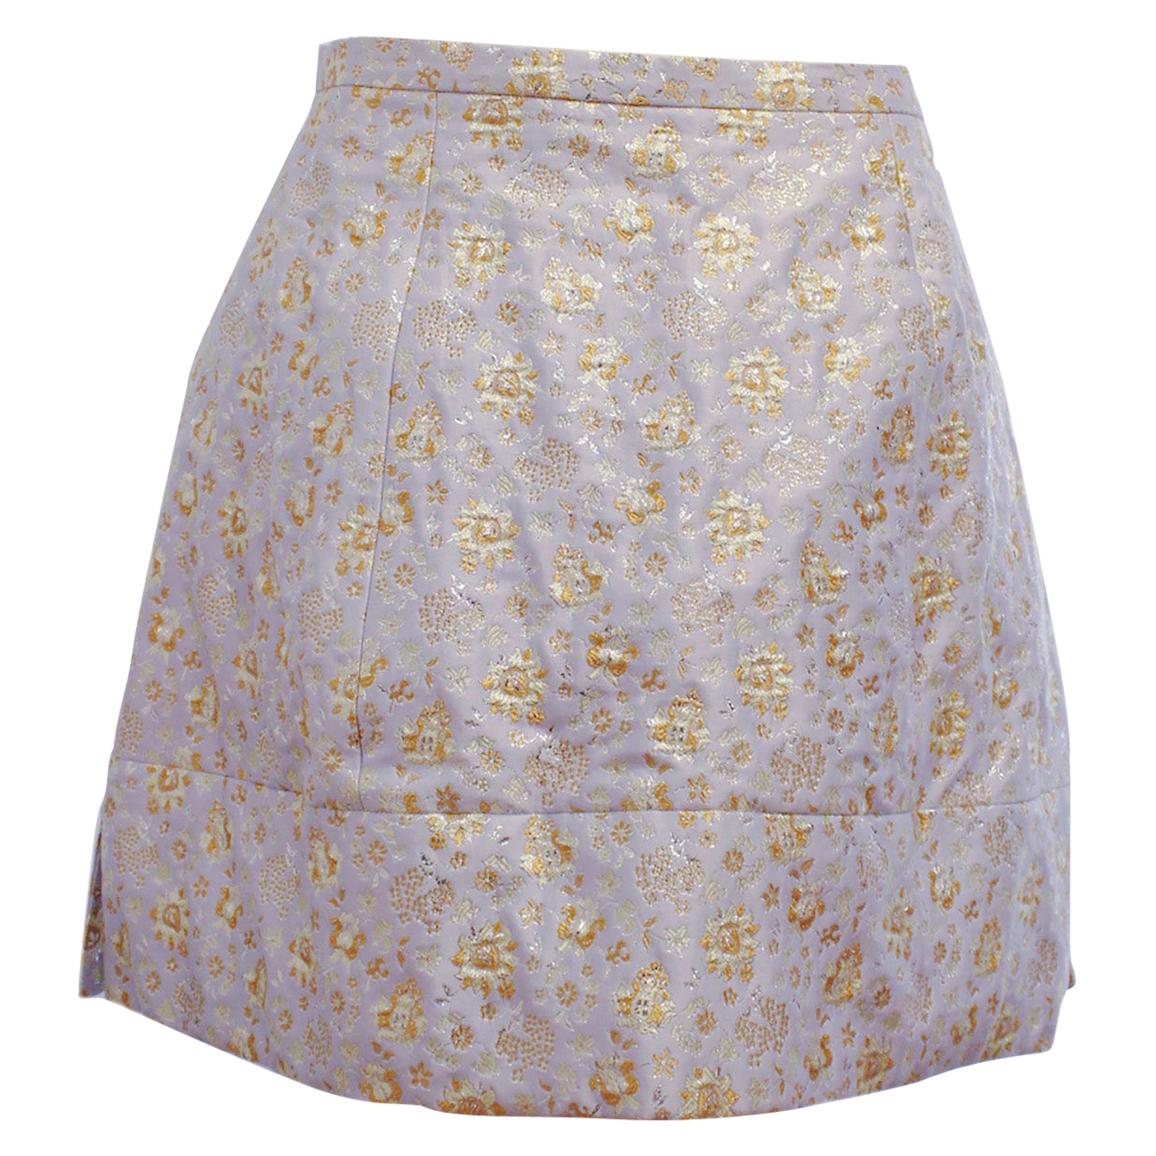 Delpozo Floral Sky Blue Skirt Embroidered w/ Gold Metallic Threads 44 EU For Sale